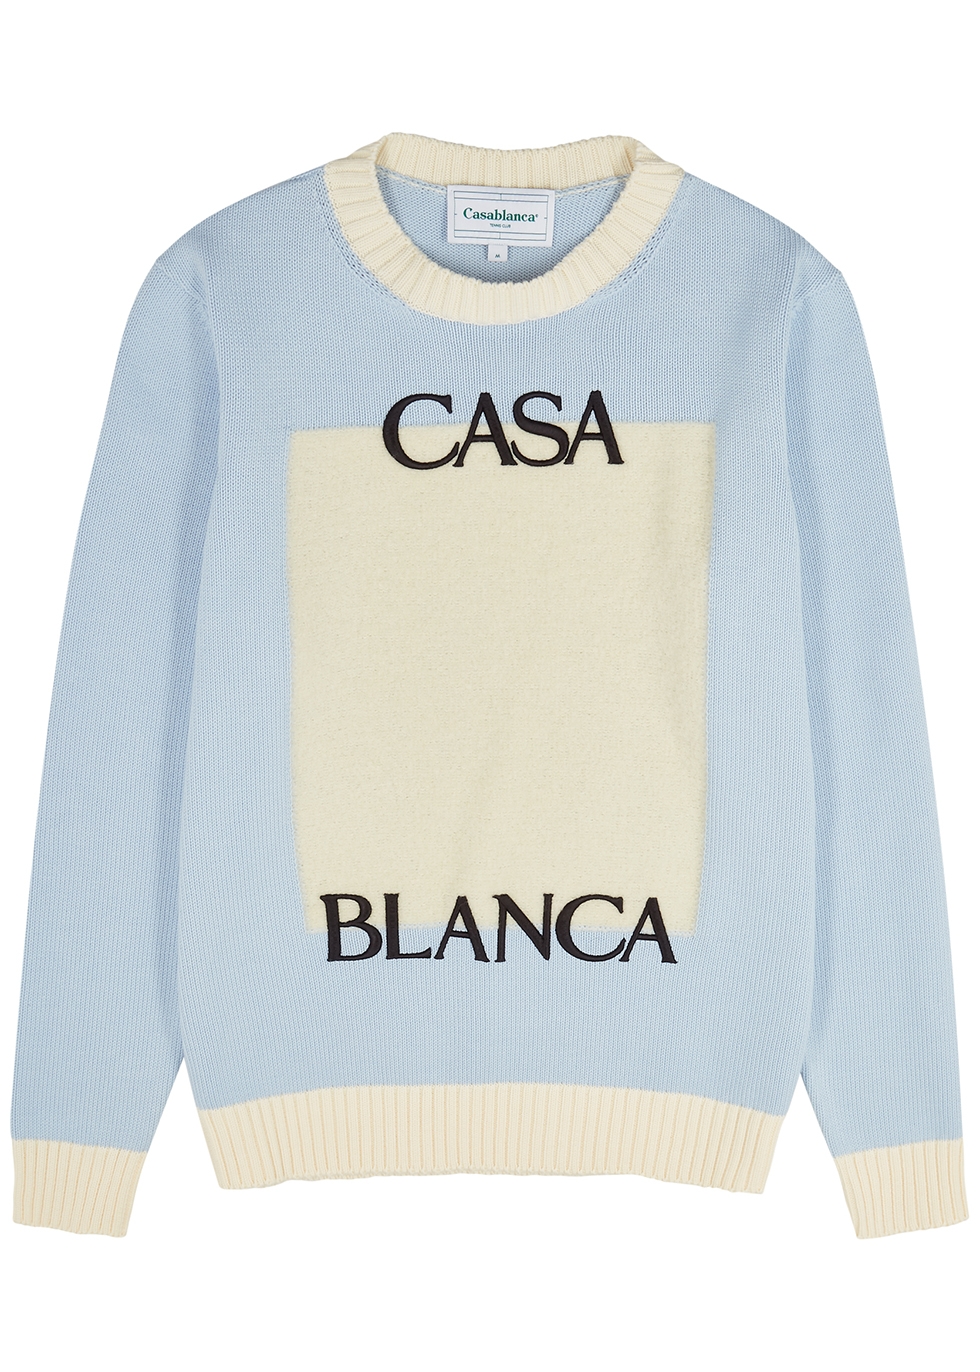 Two-tone logo knitted cotton jumper